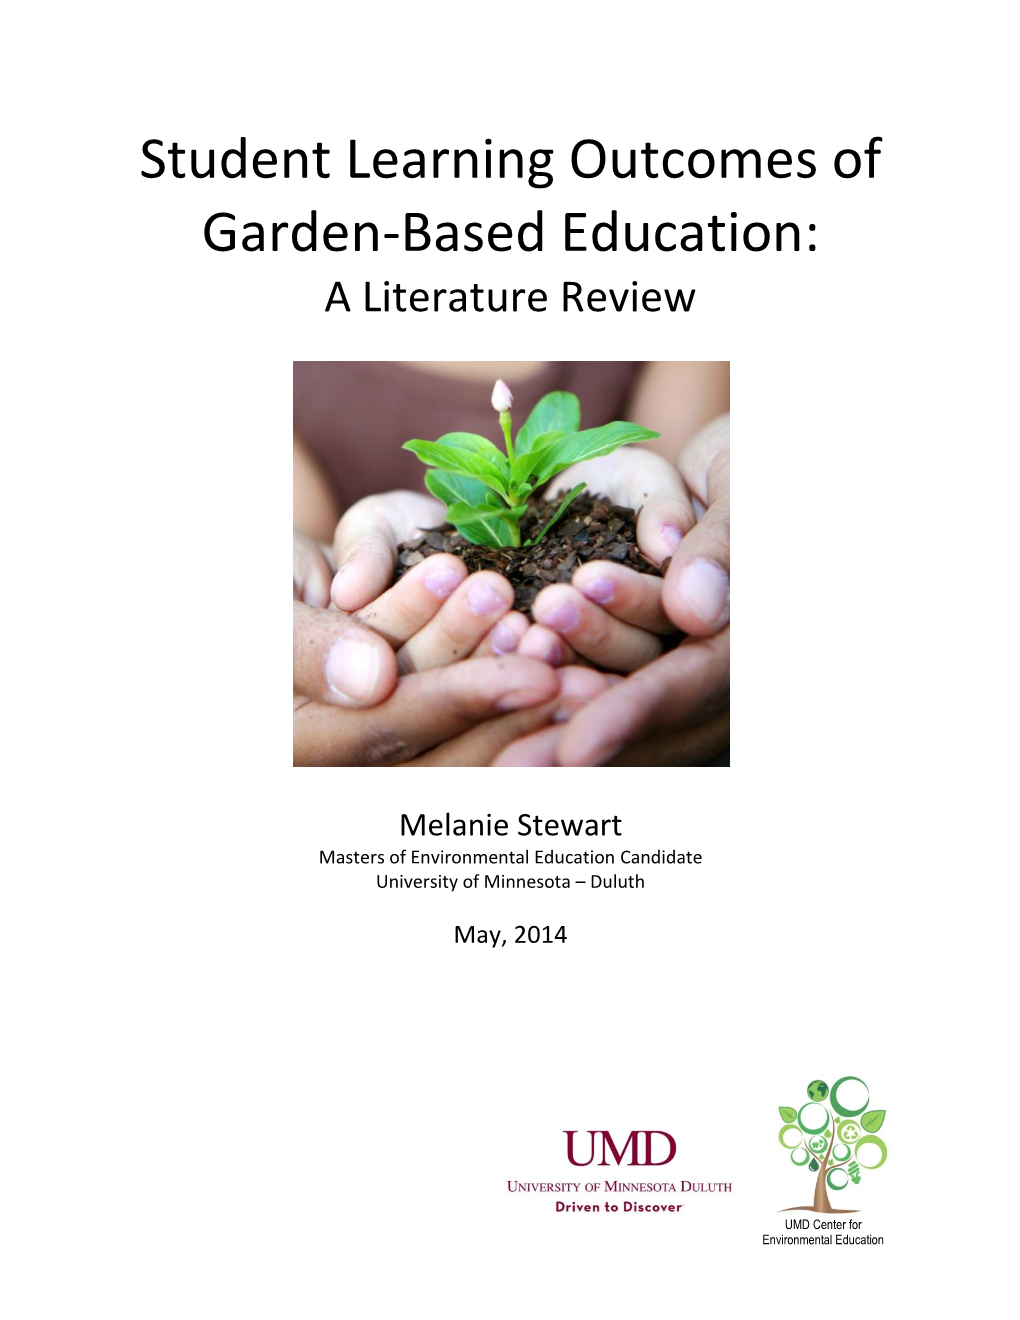 Student Learning Outcomes of Garden-Based Education: a Literature Review